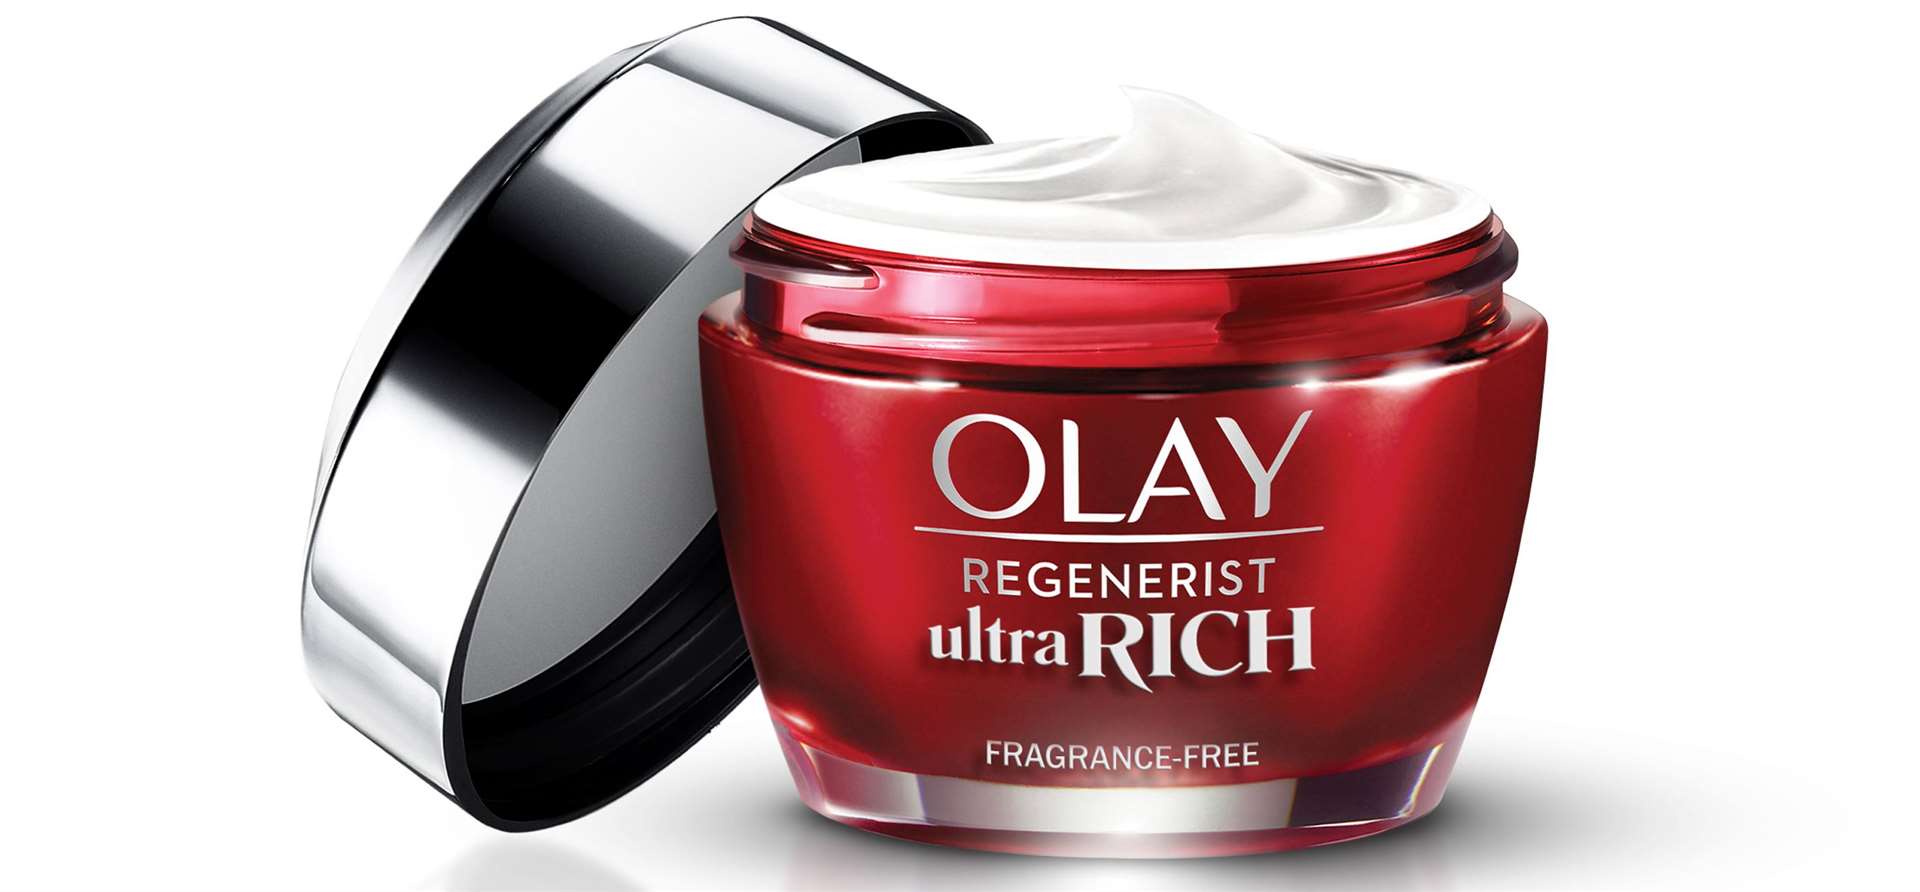 The gift that will raise a smile long into 2022. Olay Regenerist ultra rich day face cream, £34.99, Boots